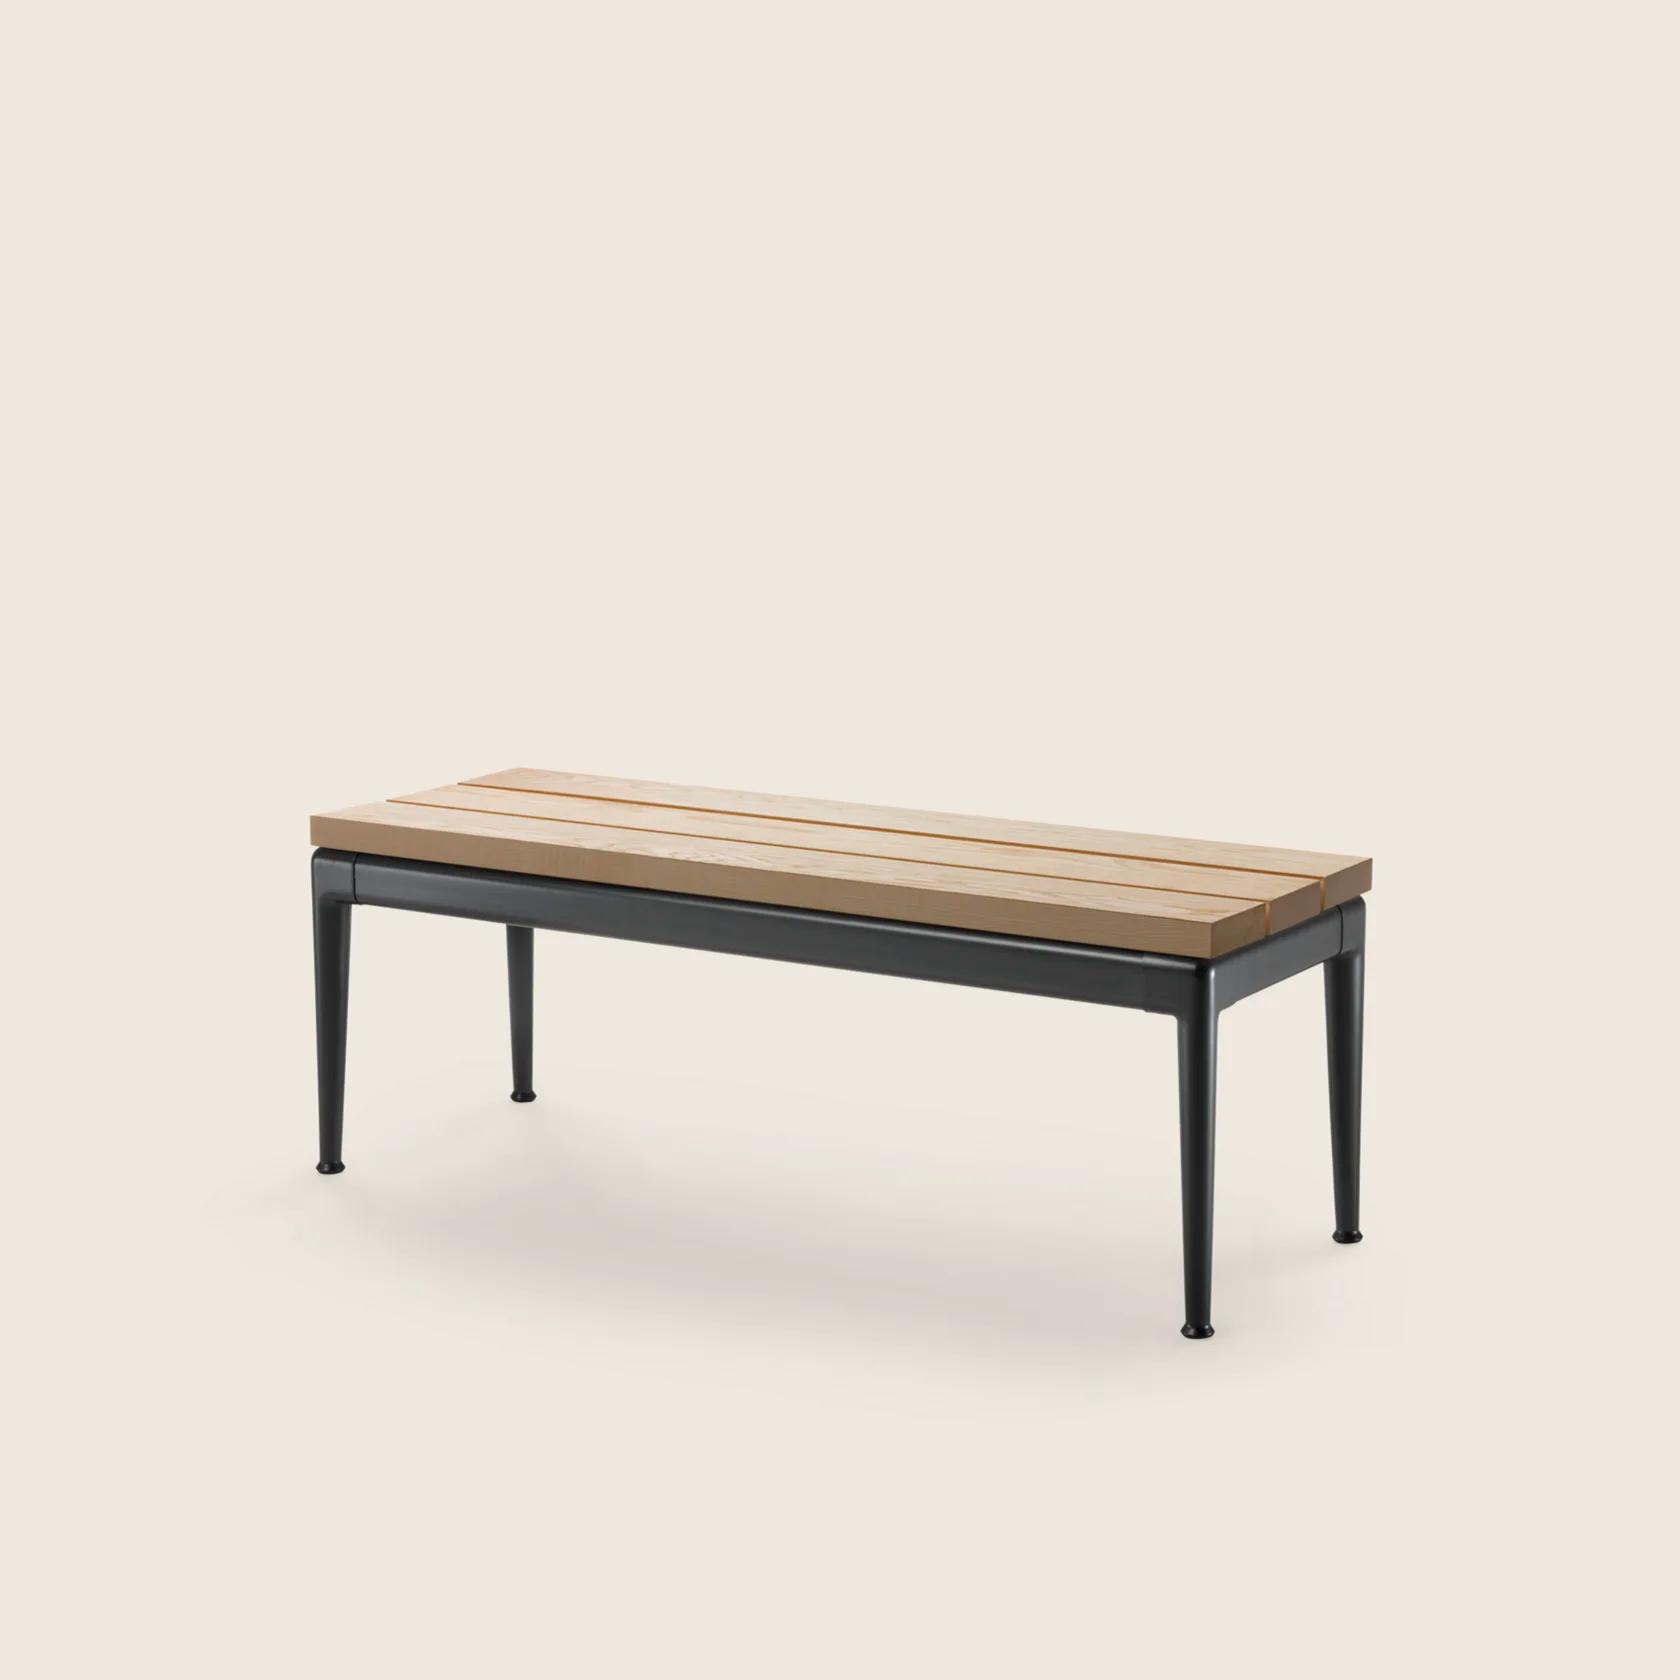 0283H1_PICO OUTDOOR_COFFEETABLE_07.png